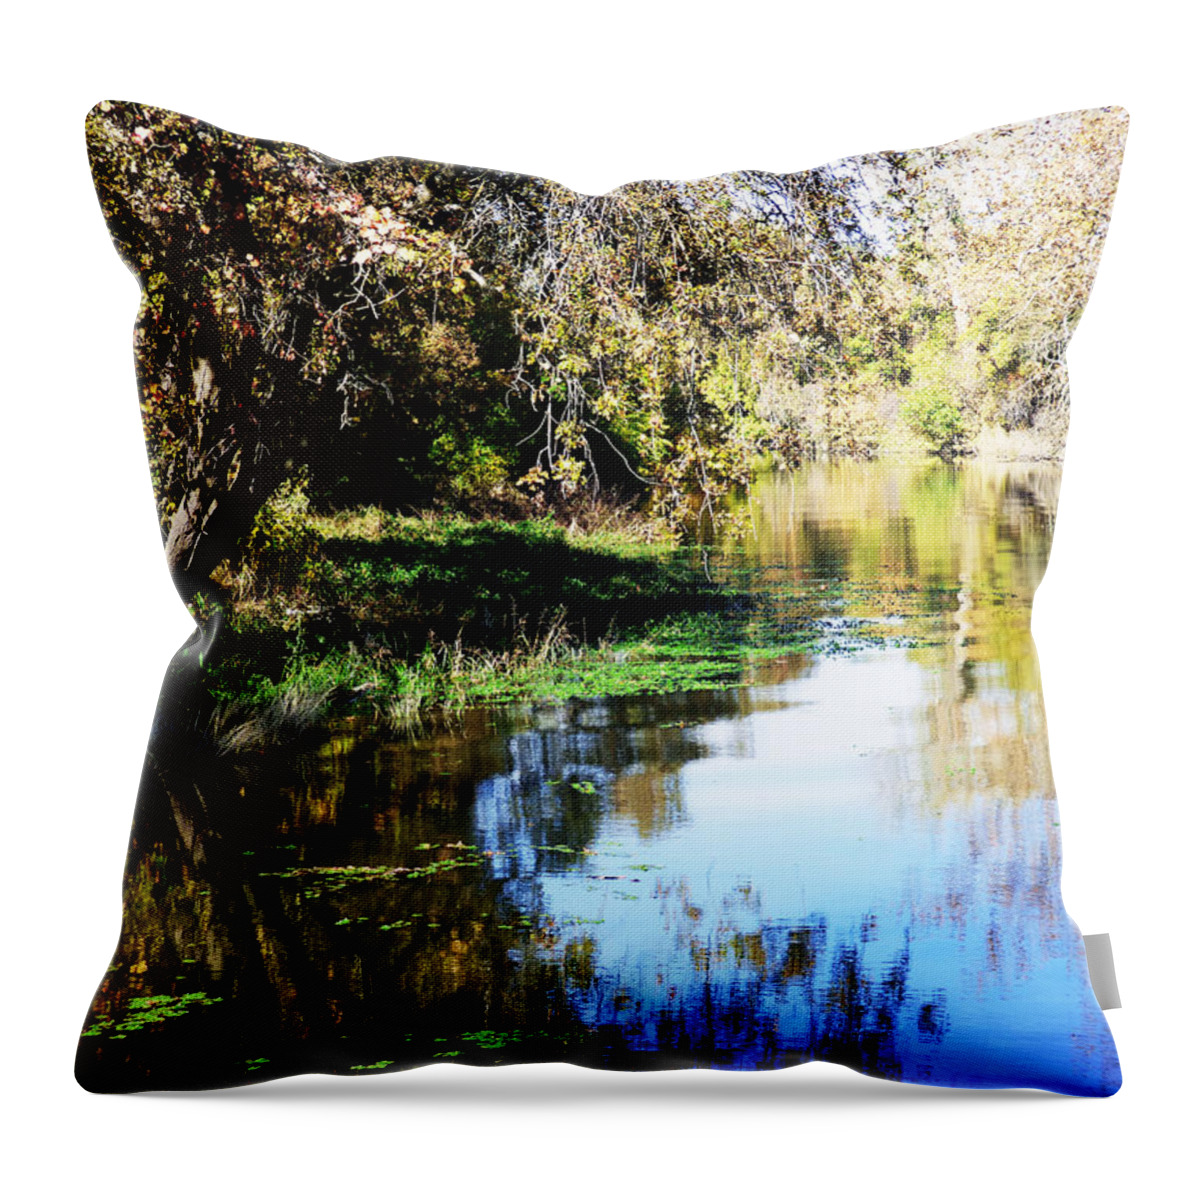 River Throw Pillow featuring the photograph A Lazy River by Pamela Patch